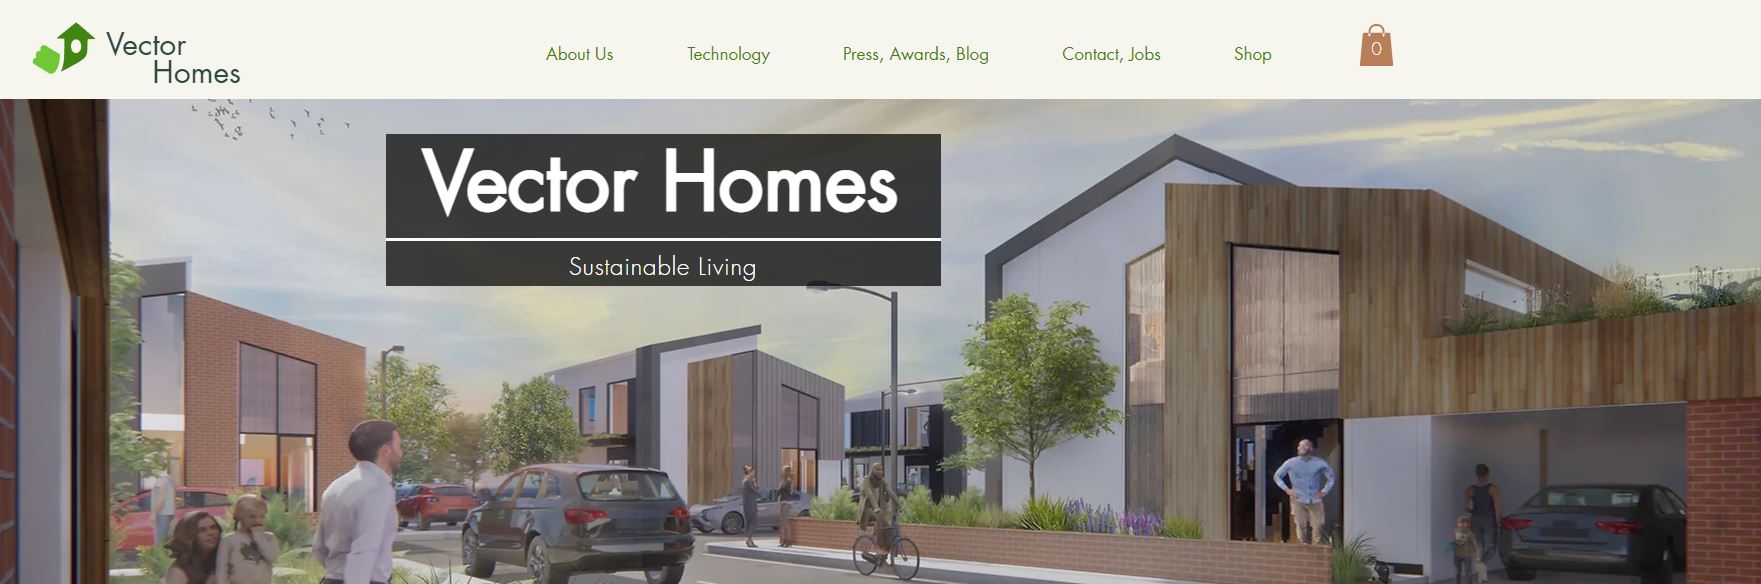 Introducing Vector Homes, a revolutionary CleanTech startup which raised $550K in funding from notable investors